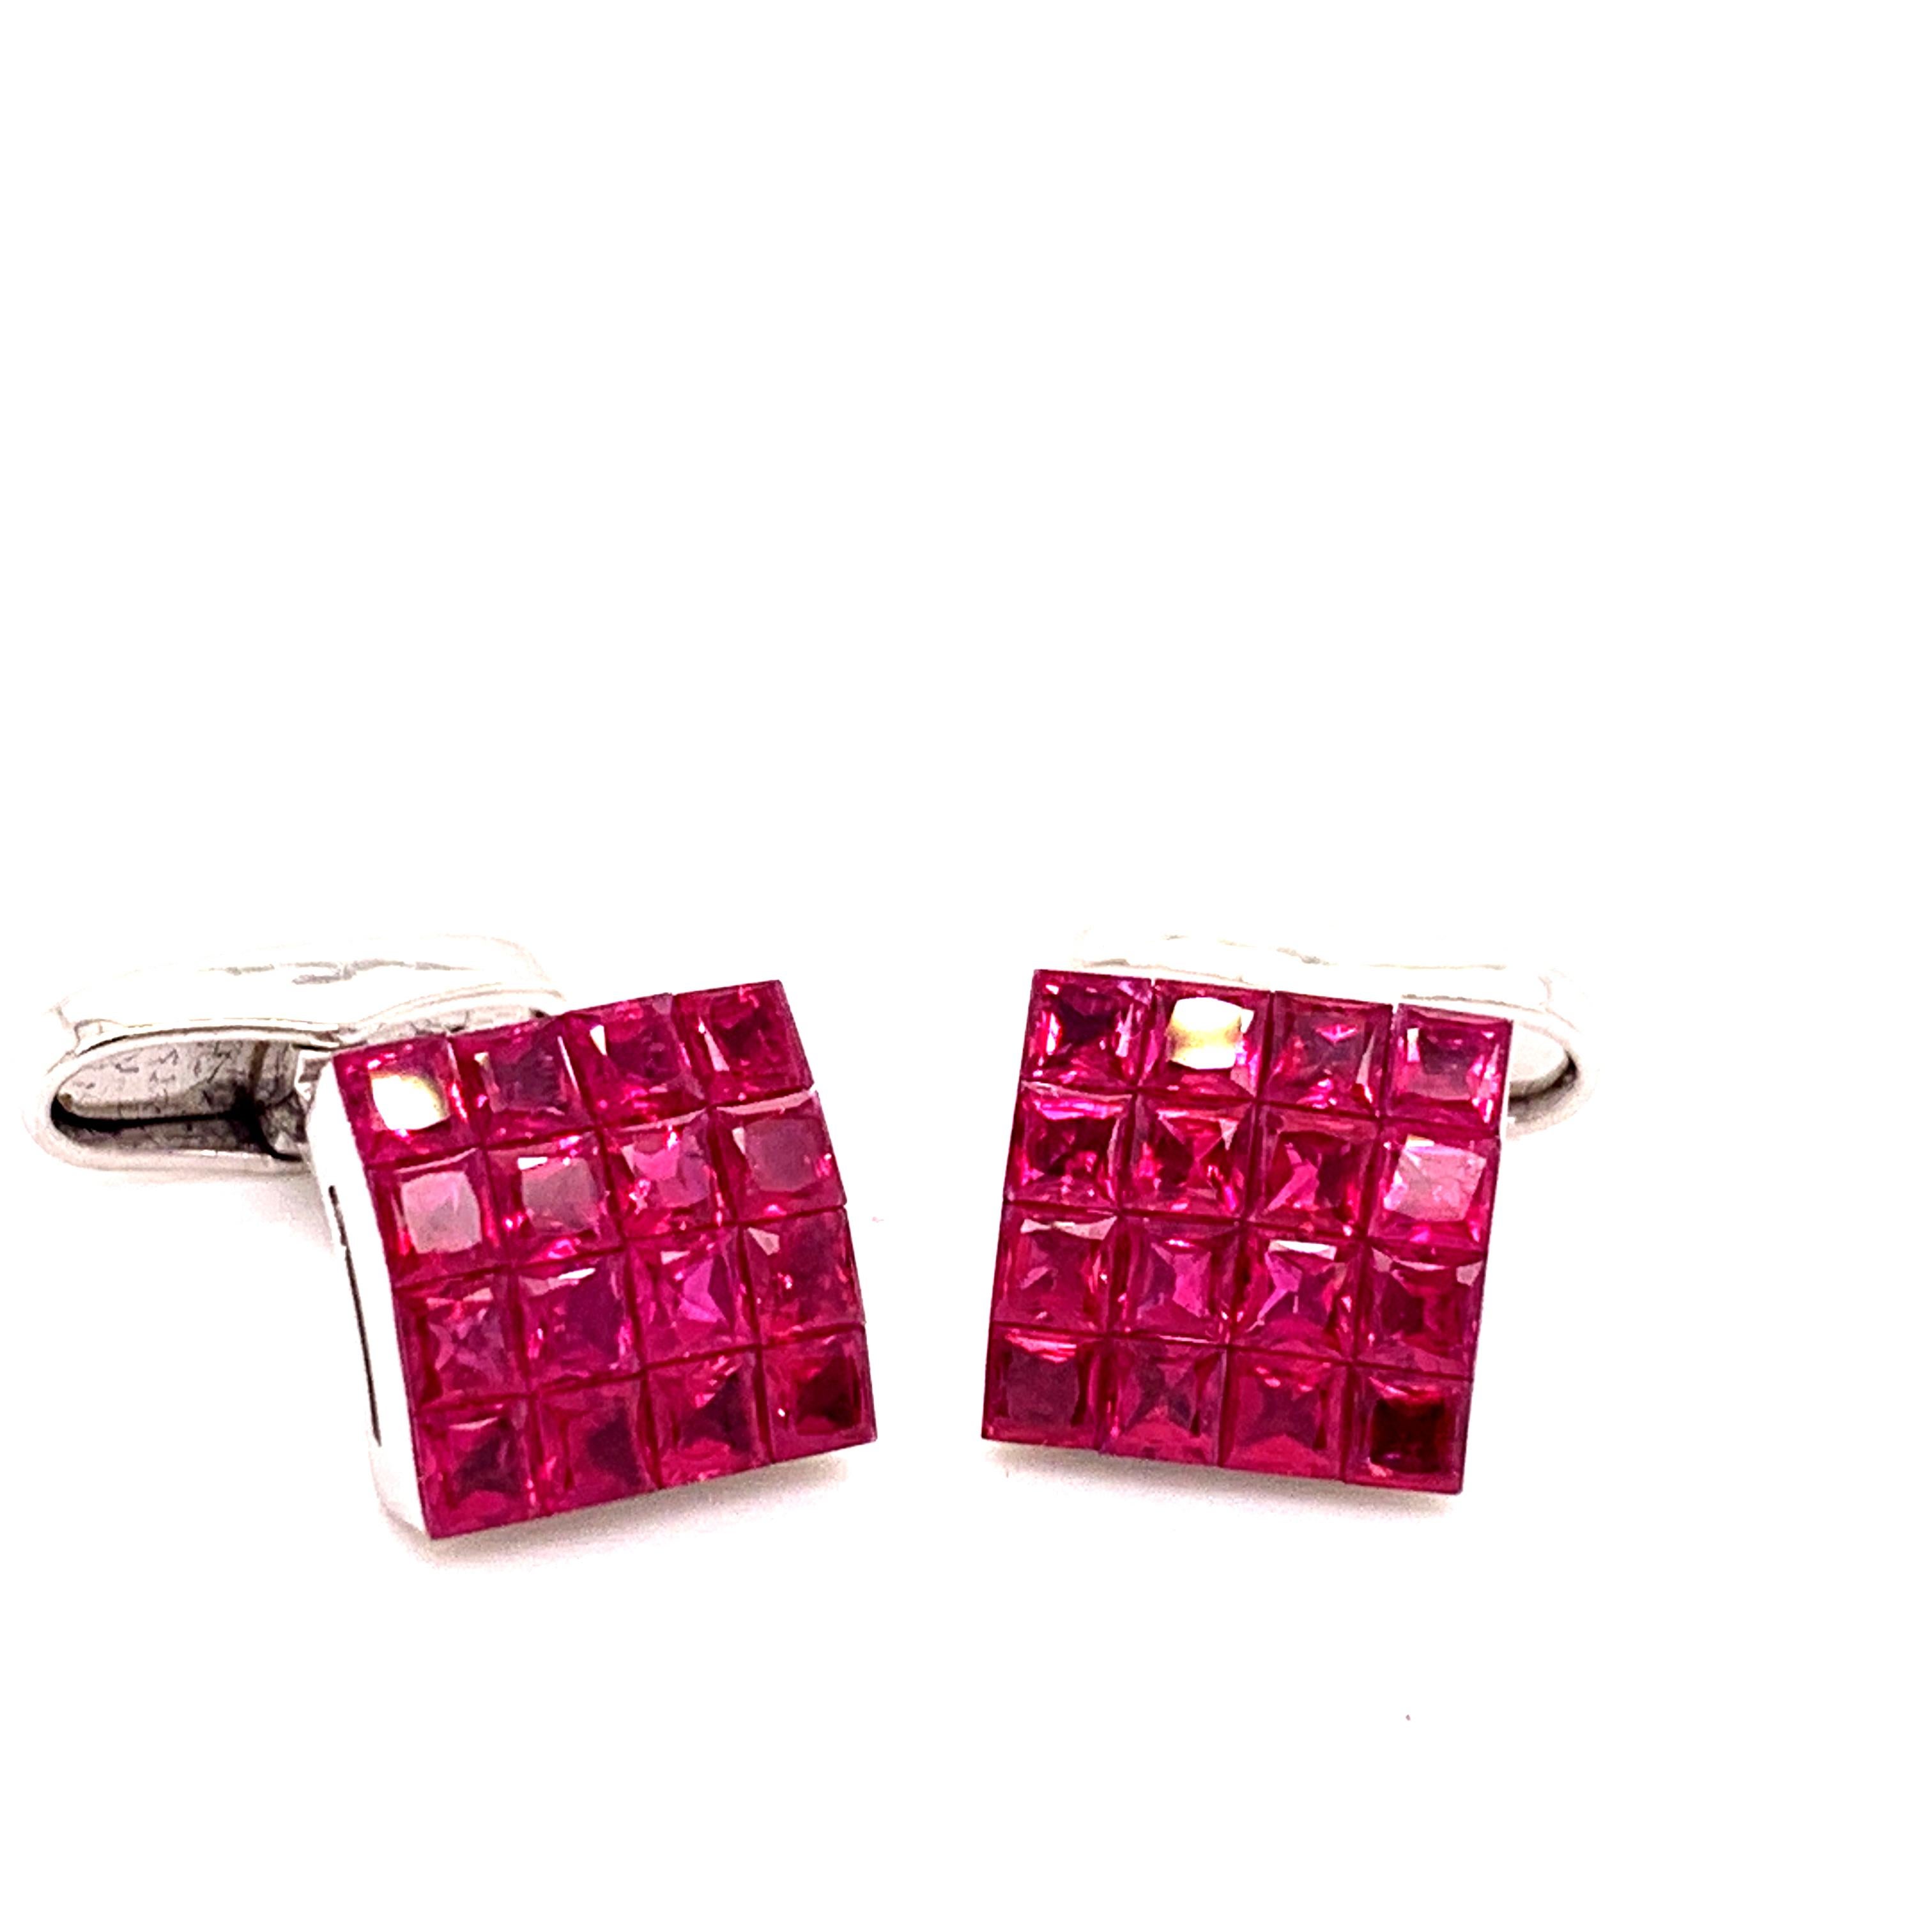 French Cut Platinum 3.10 Carat Invisibly Set Ruby Cufflinks